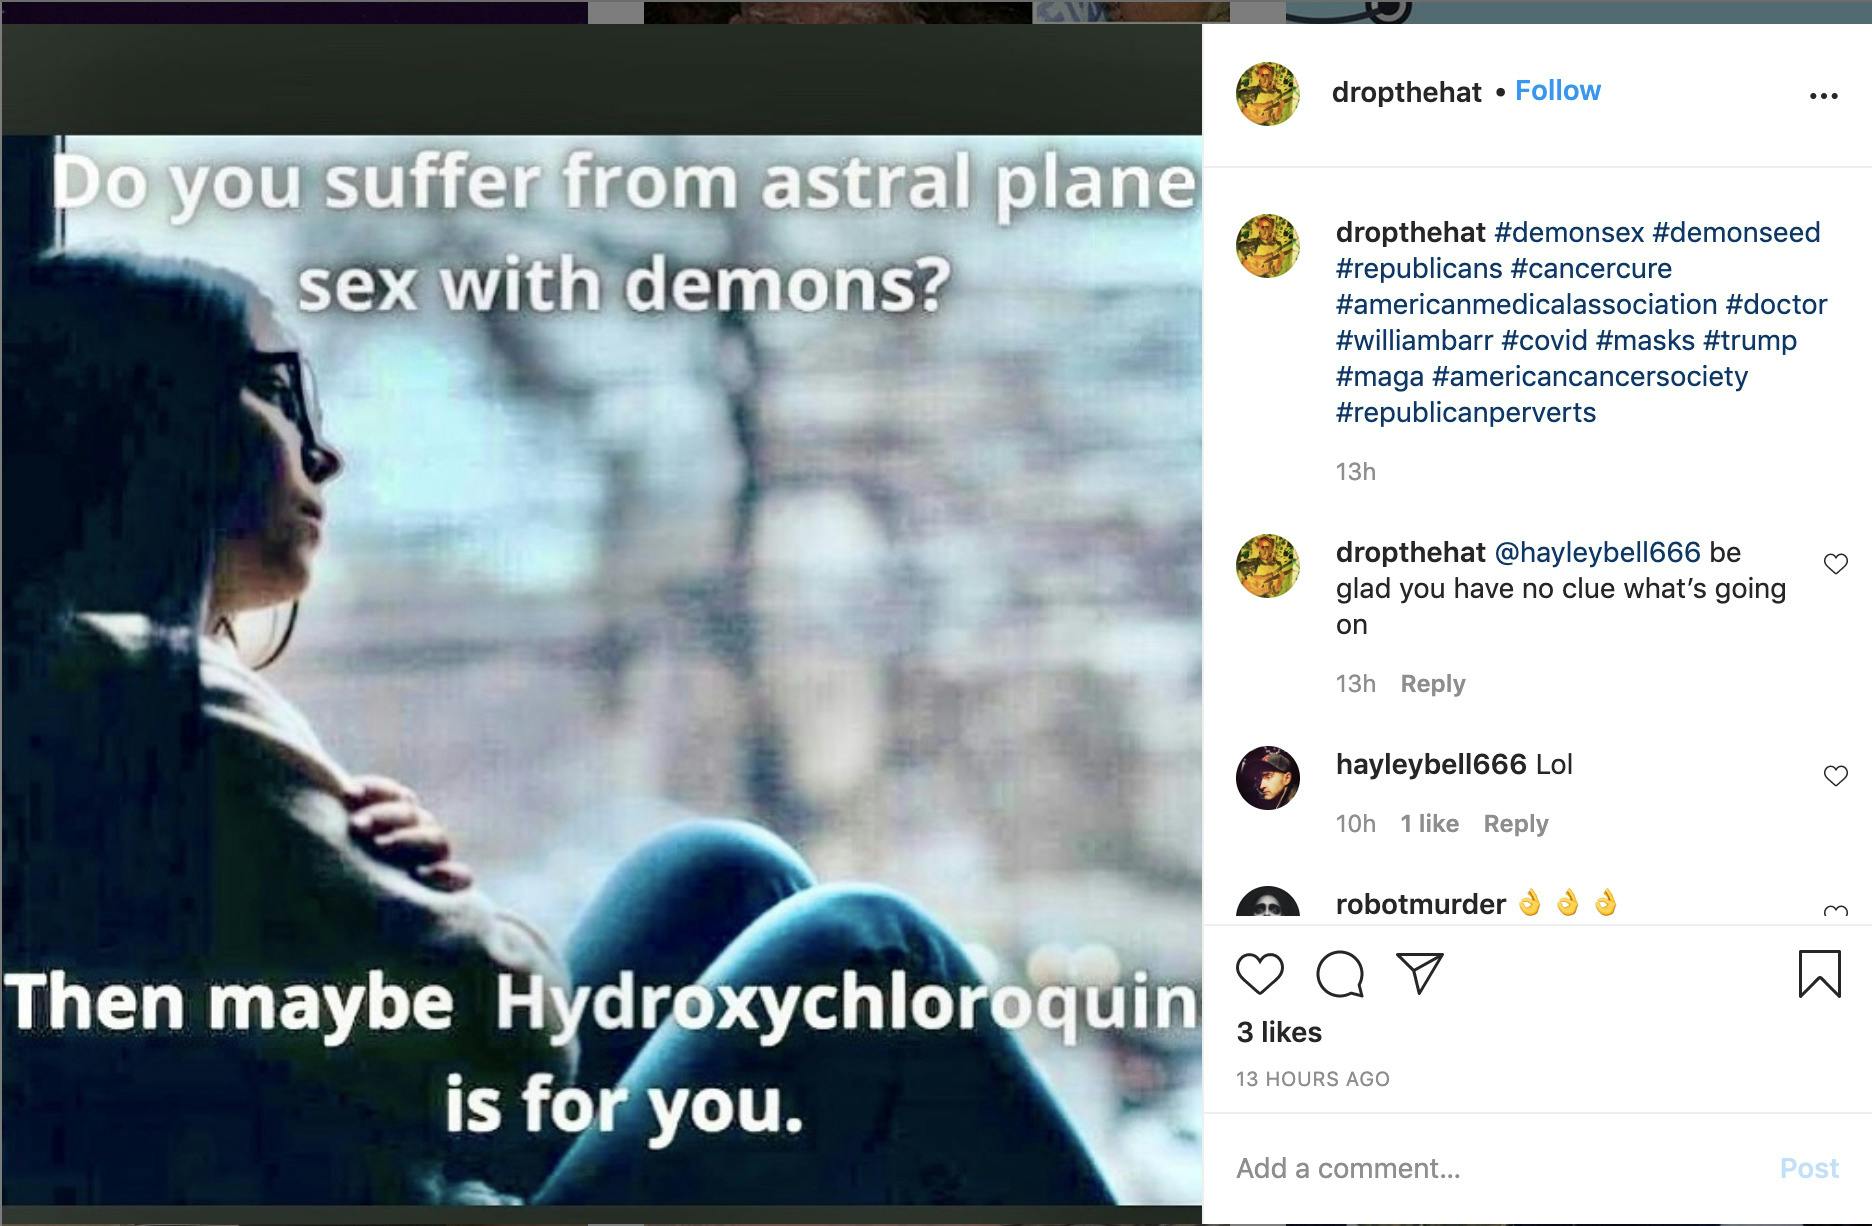 Image of woman sat moodily a window with text "Do you suffer from astral plane sex with demons? Then maybe hydroxychloroquine is for you"